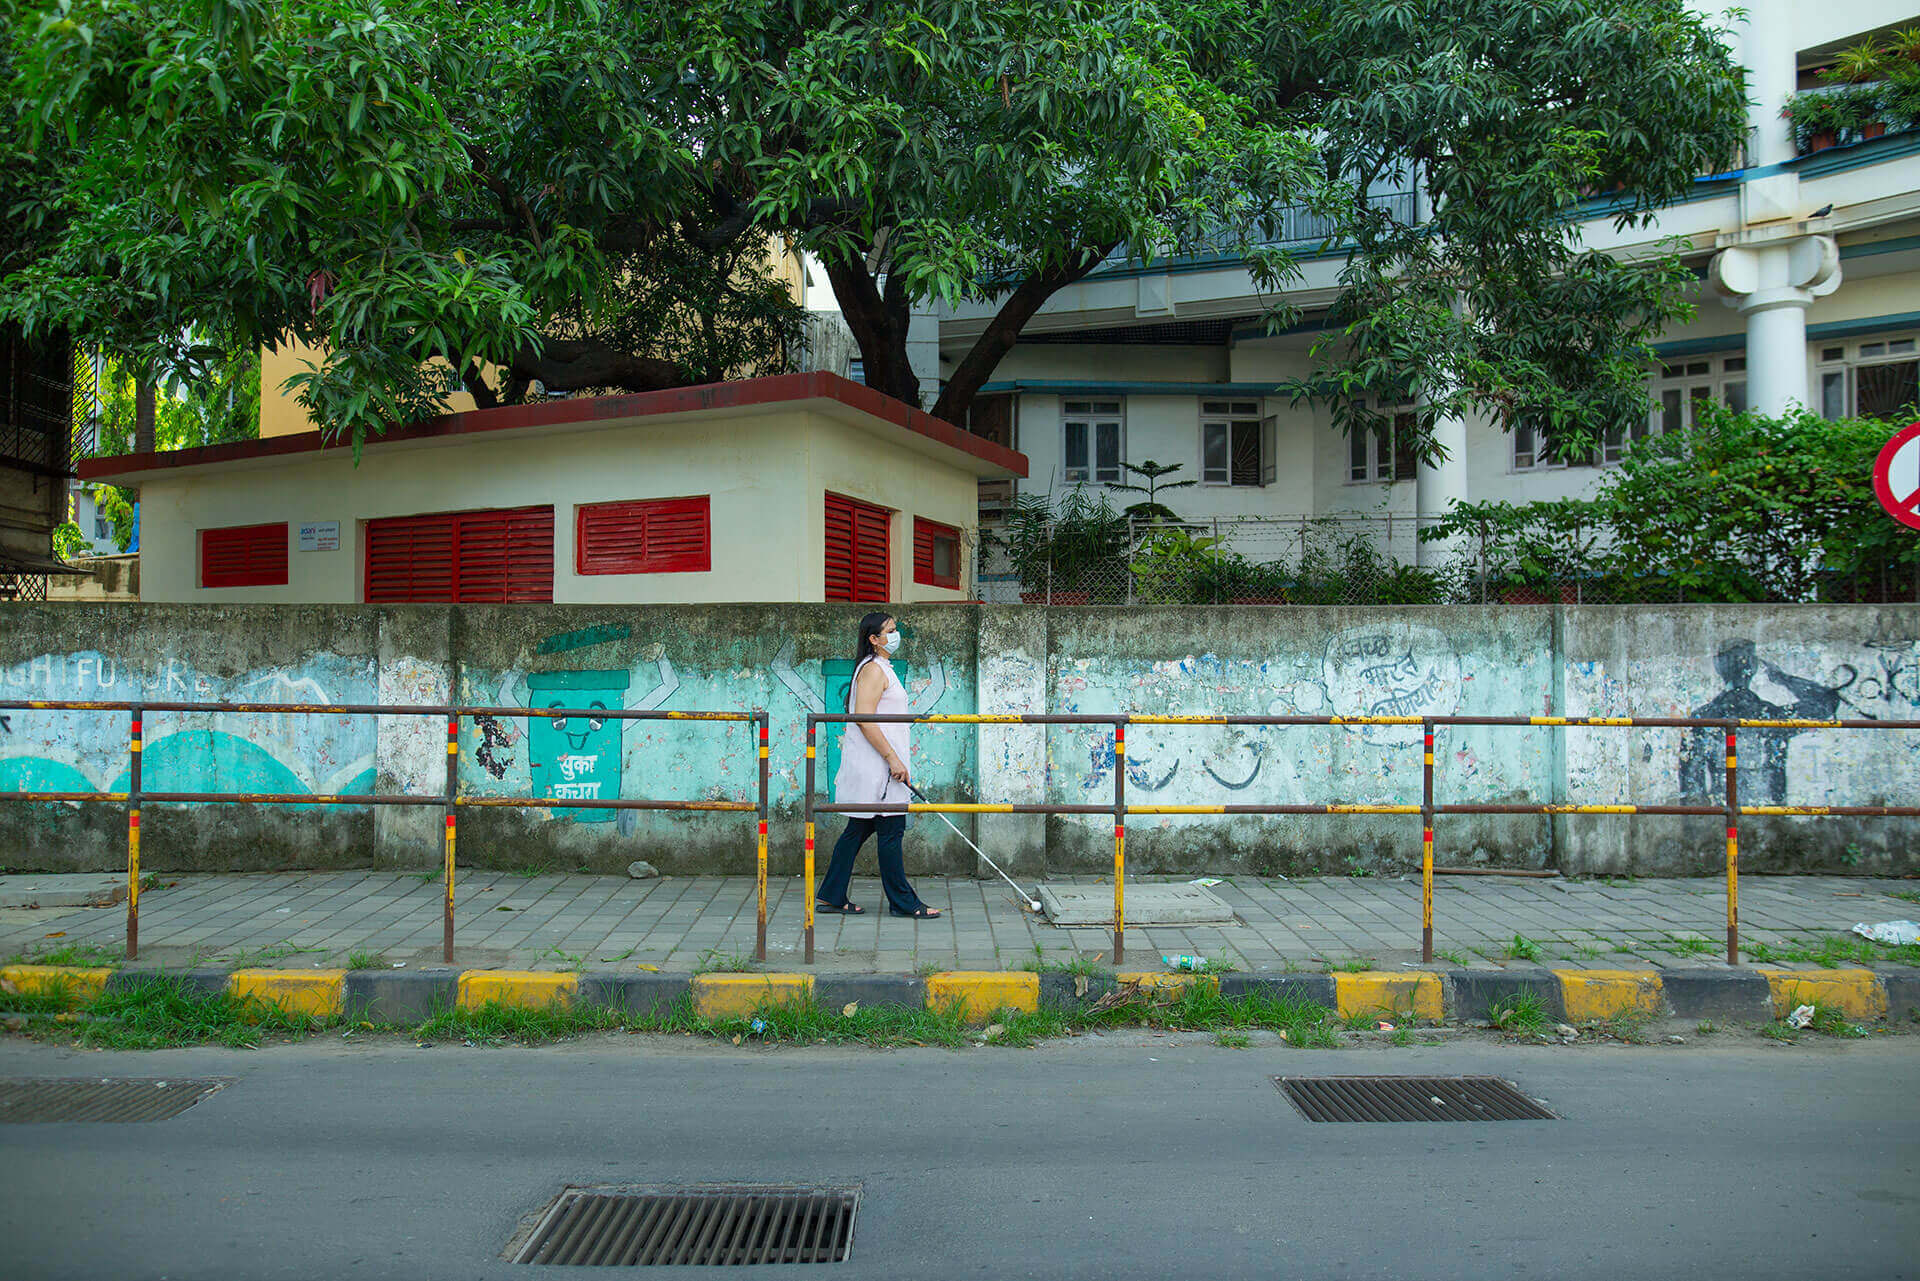 Nidhi walks along a pavement using her white cane. The pavement is separated from local properties by a concrete wall and from the street by a metal fence.